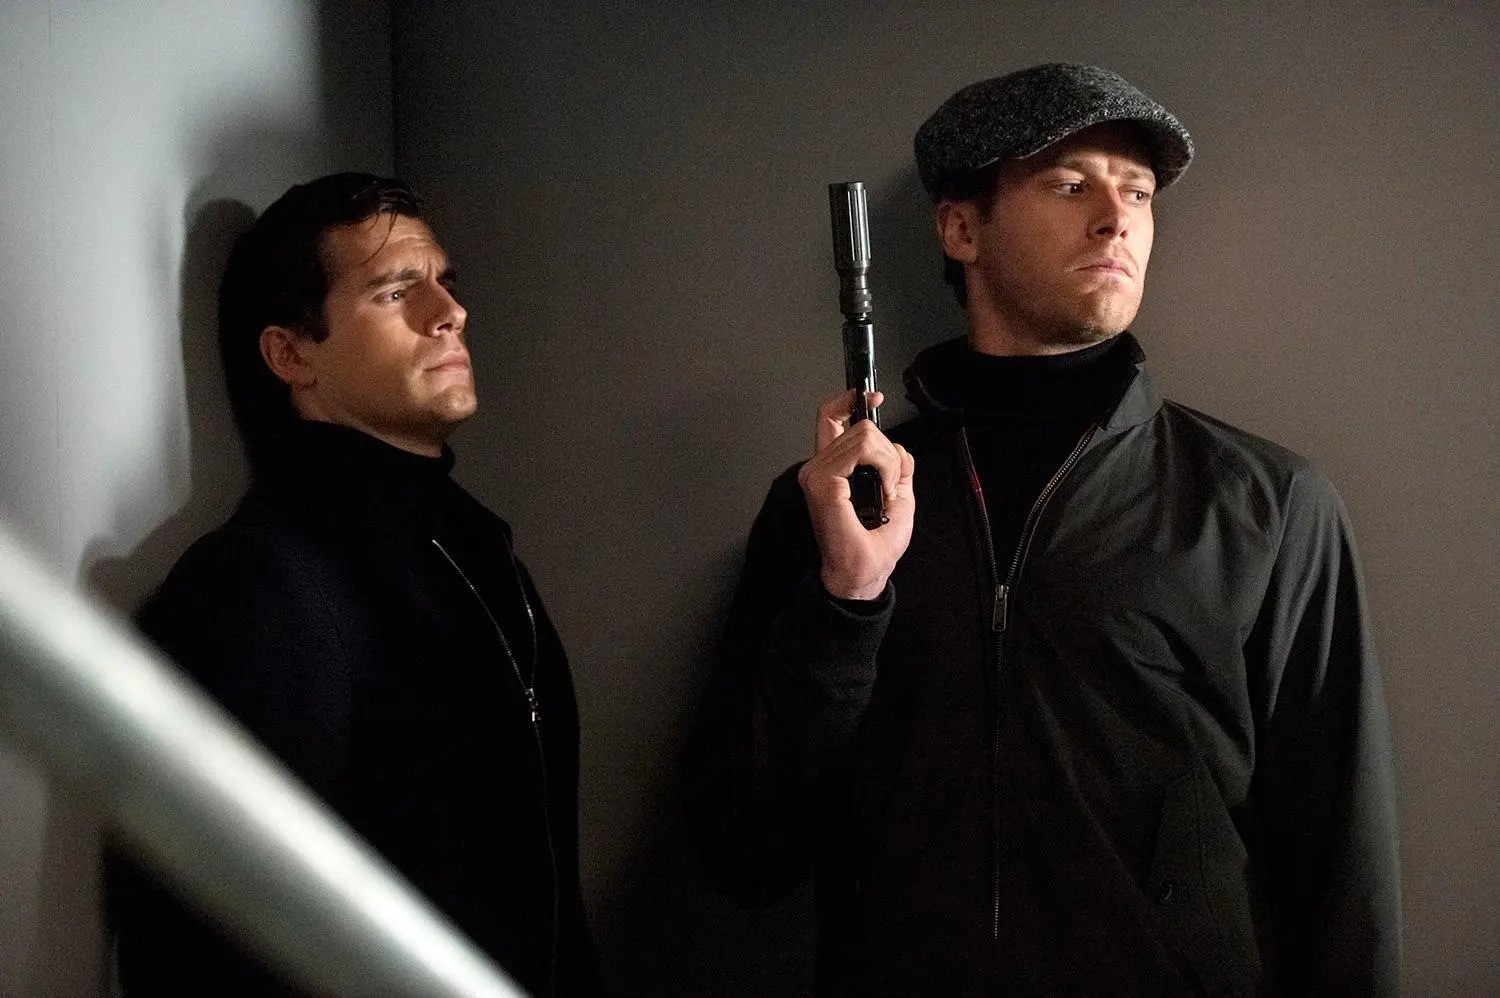 Henry Cavill and Armie Hammer in the spy action thriller, The Man From UNCLE